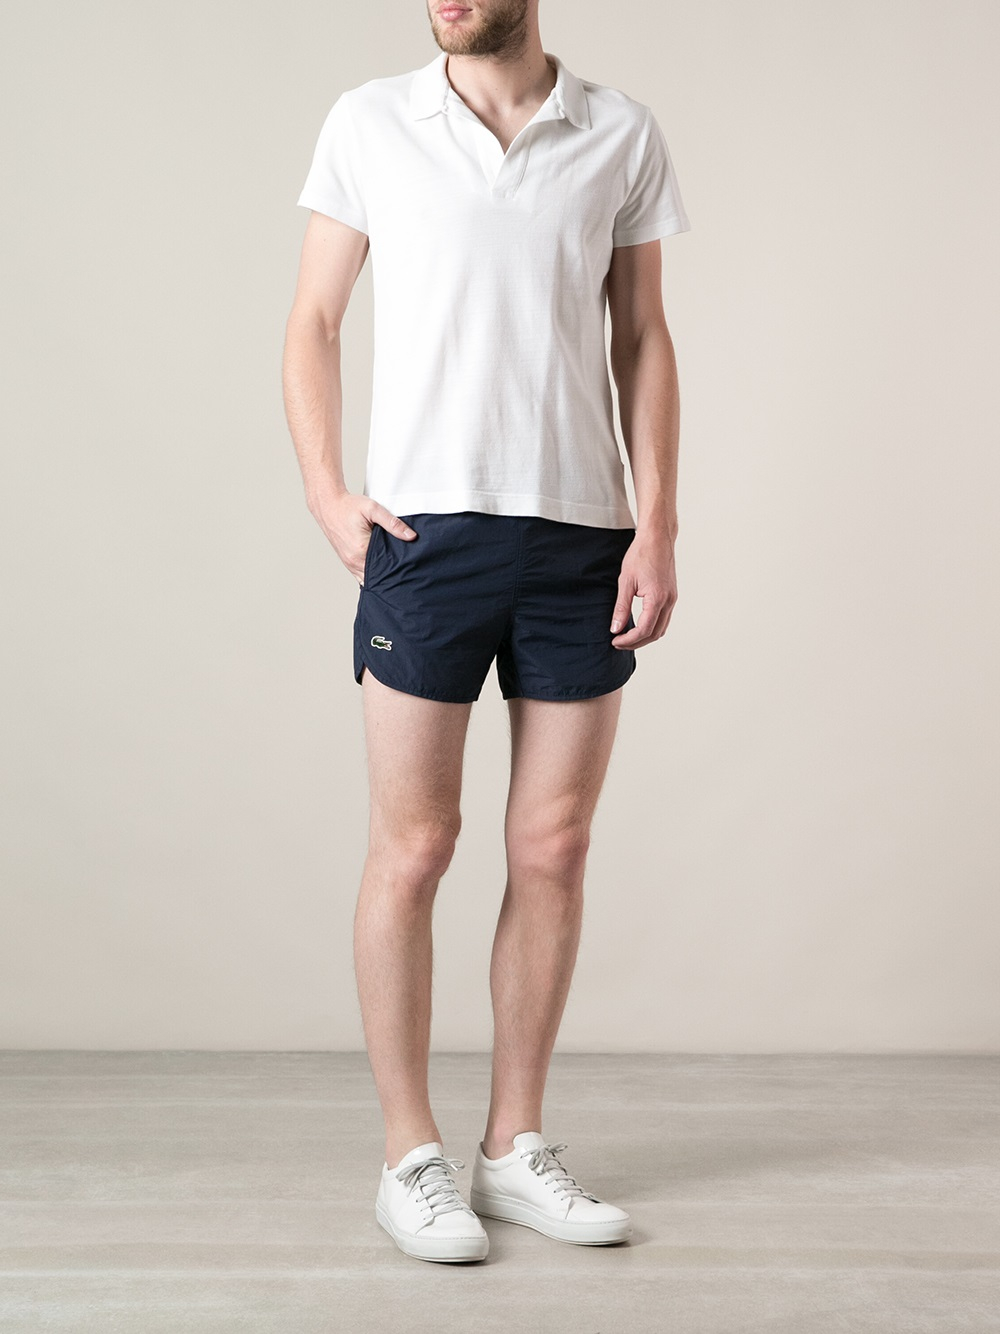 Lyst - Lacoste l!ive Classic Swim Shorts in Blue for Men